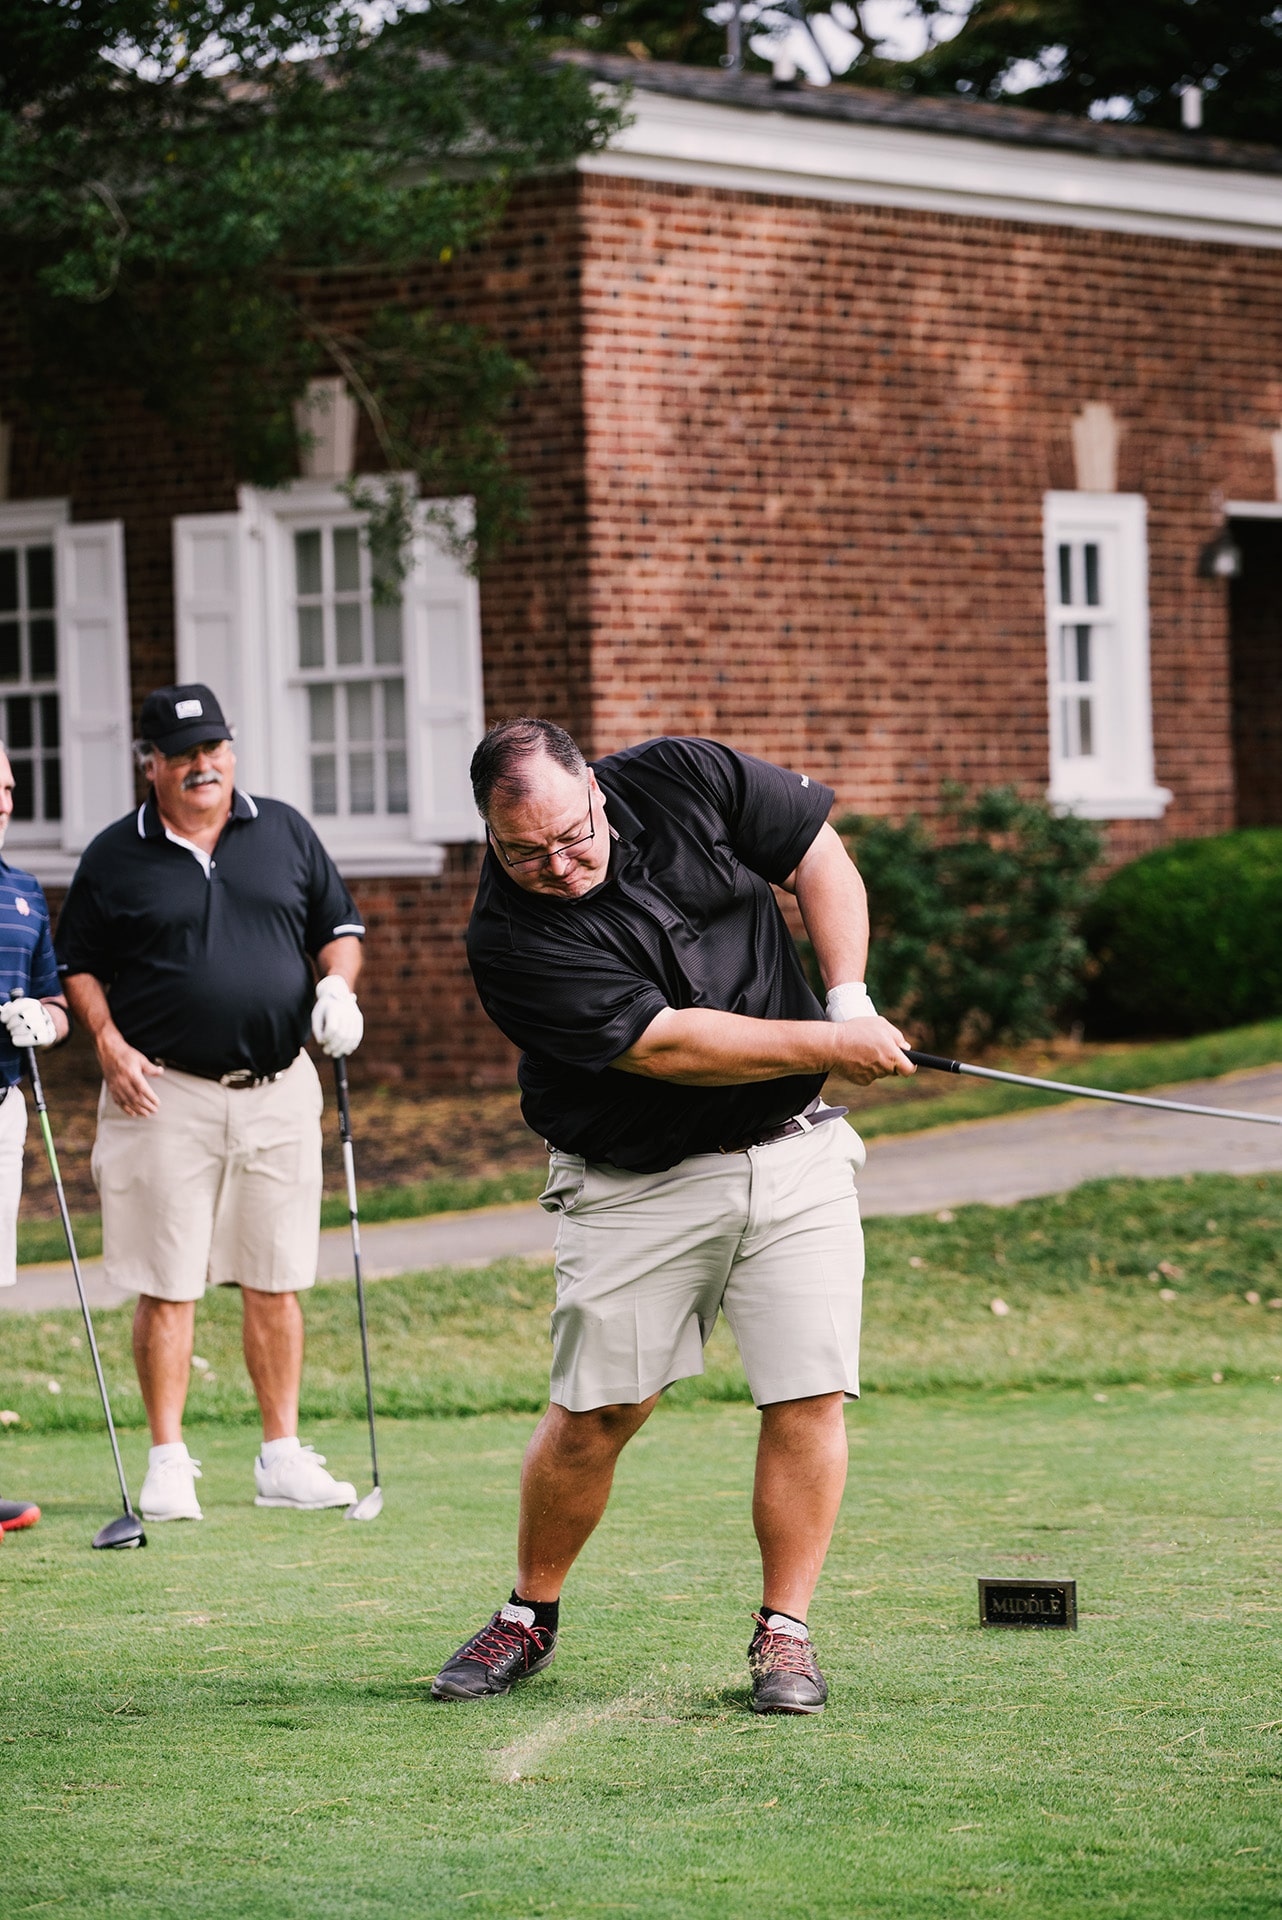 On October 7th, 2019 Community Options, Inc. hosted its golf outing at TPC Jasna Polana in Princeton, New Jersey.